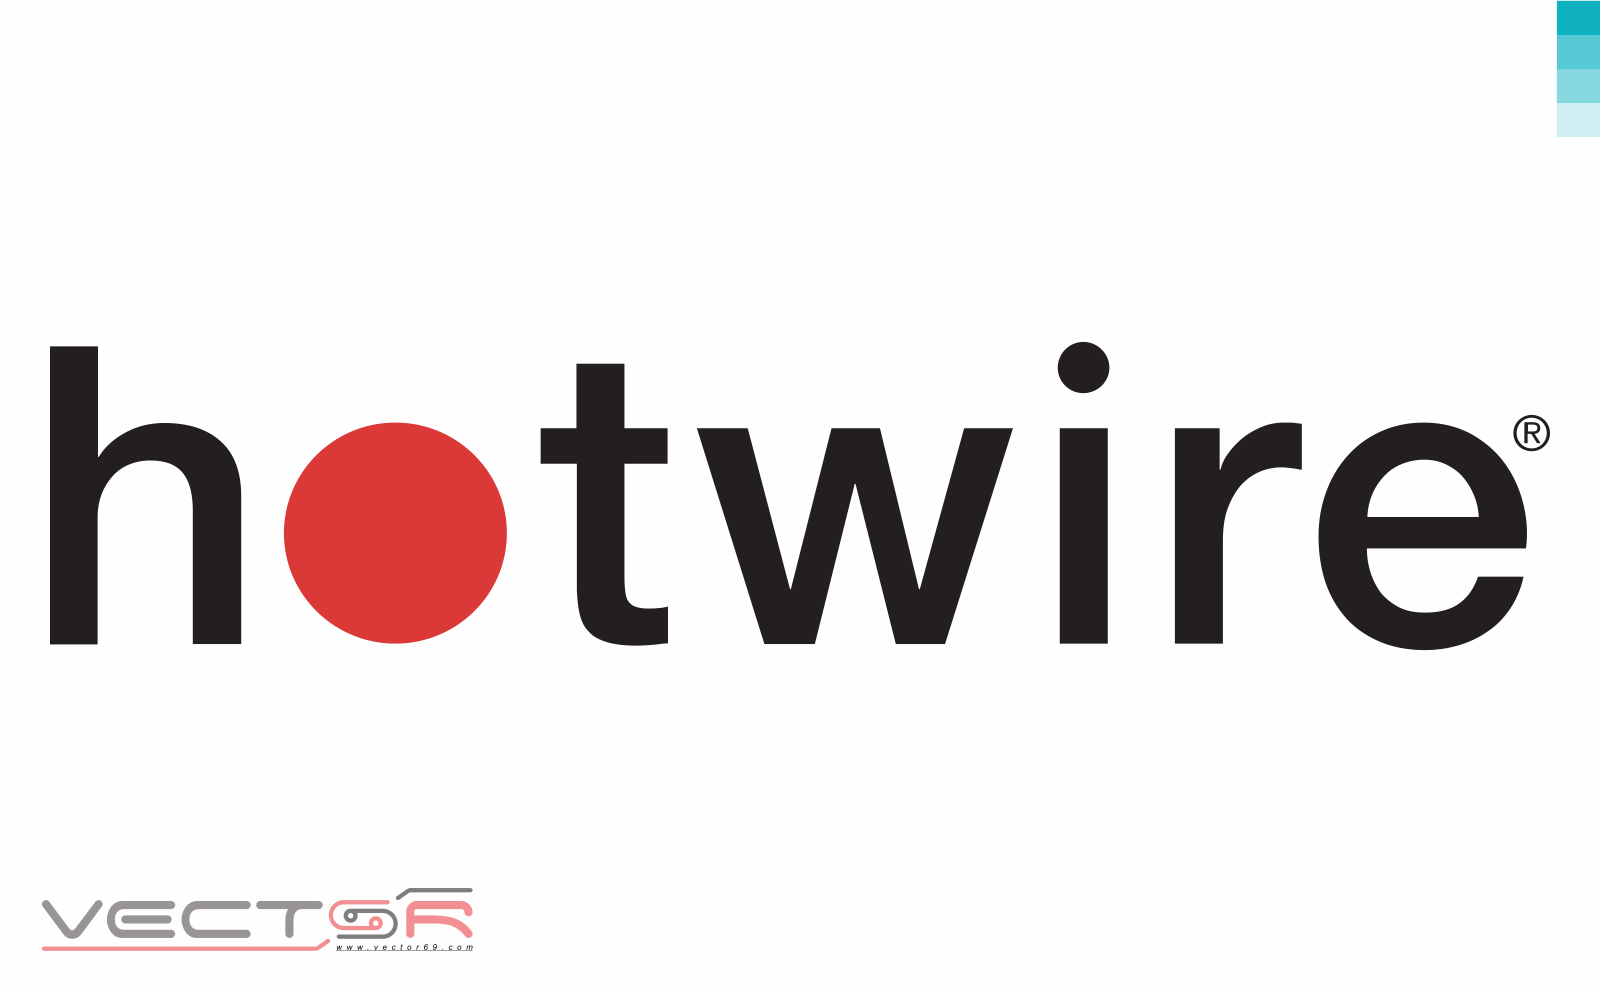 Hotwire Logo - Download Vector File SVG (Scalable Vector Graphics)